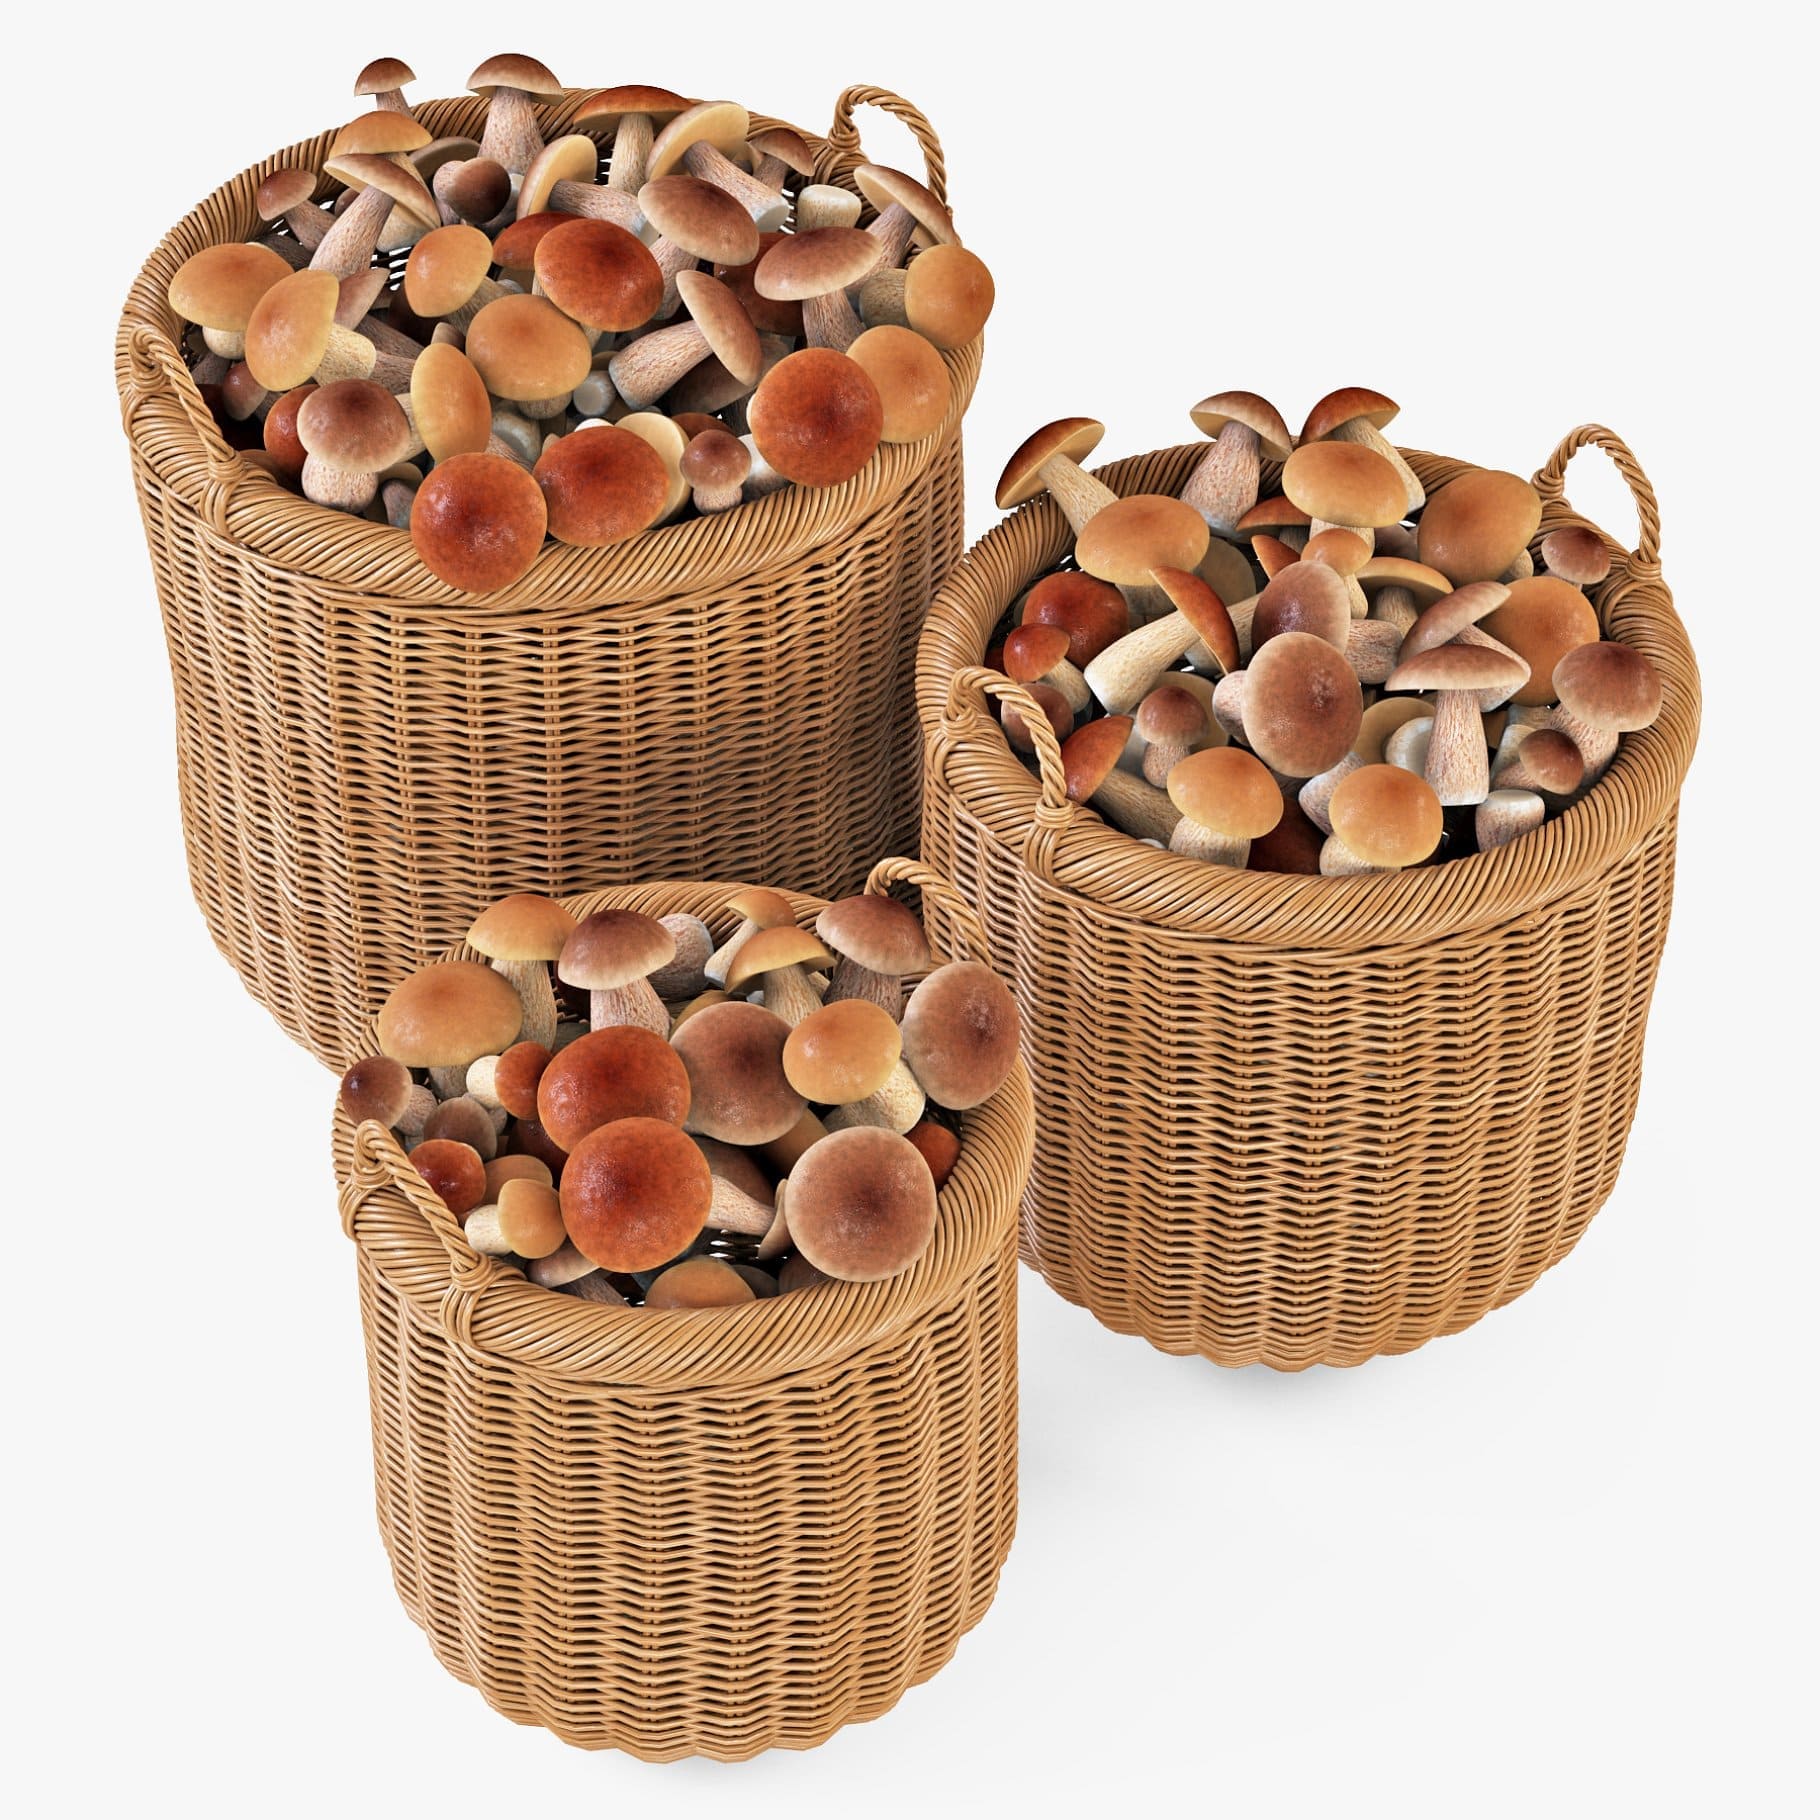 Image of baskets of mushrooms with brown tops.